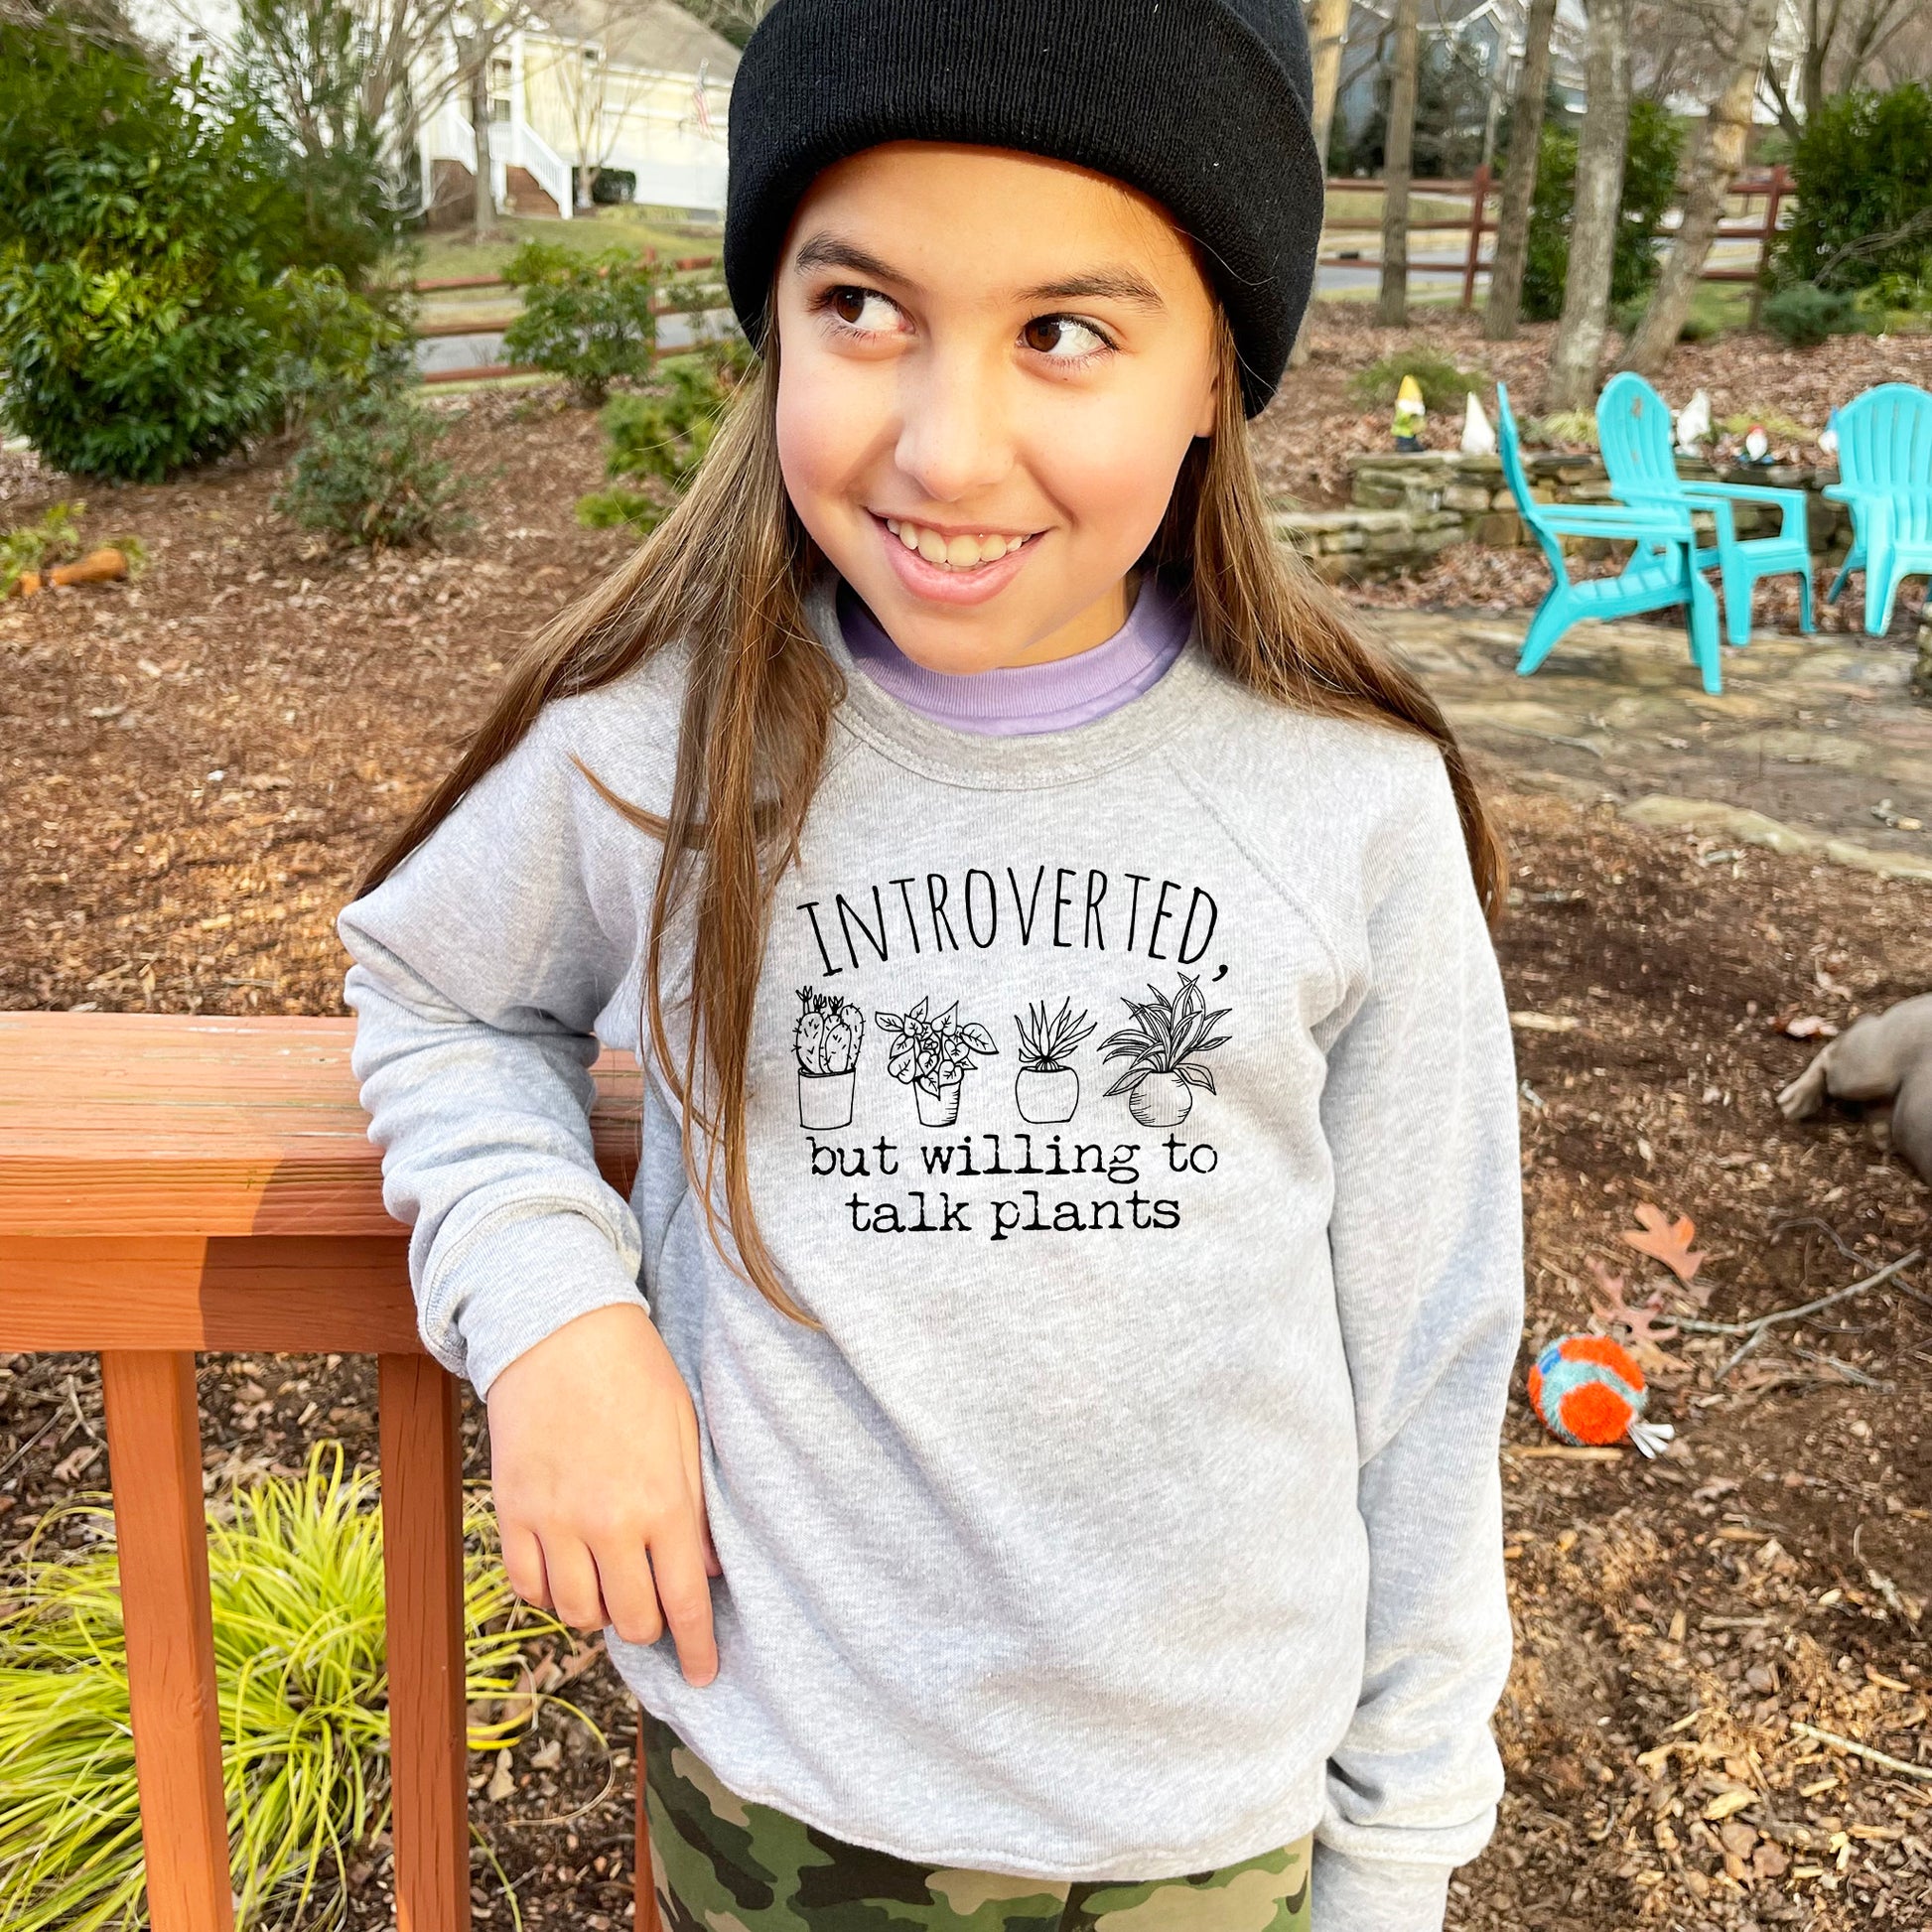 a young girl wearing a hat and a sweatshirt